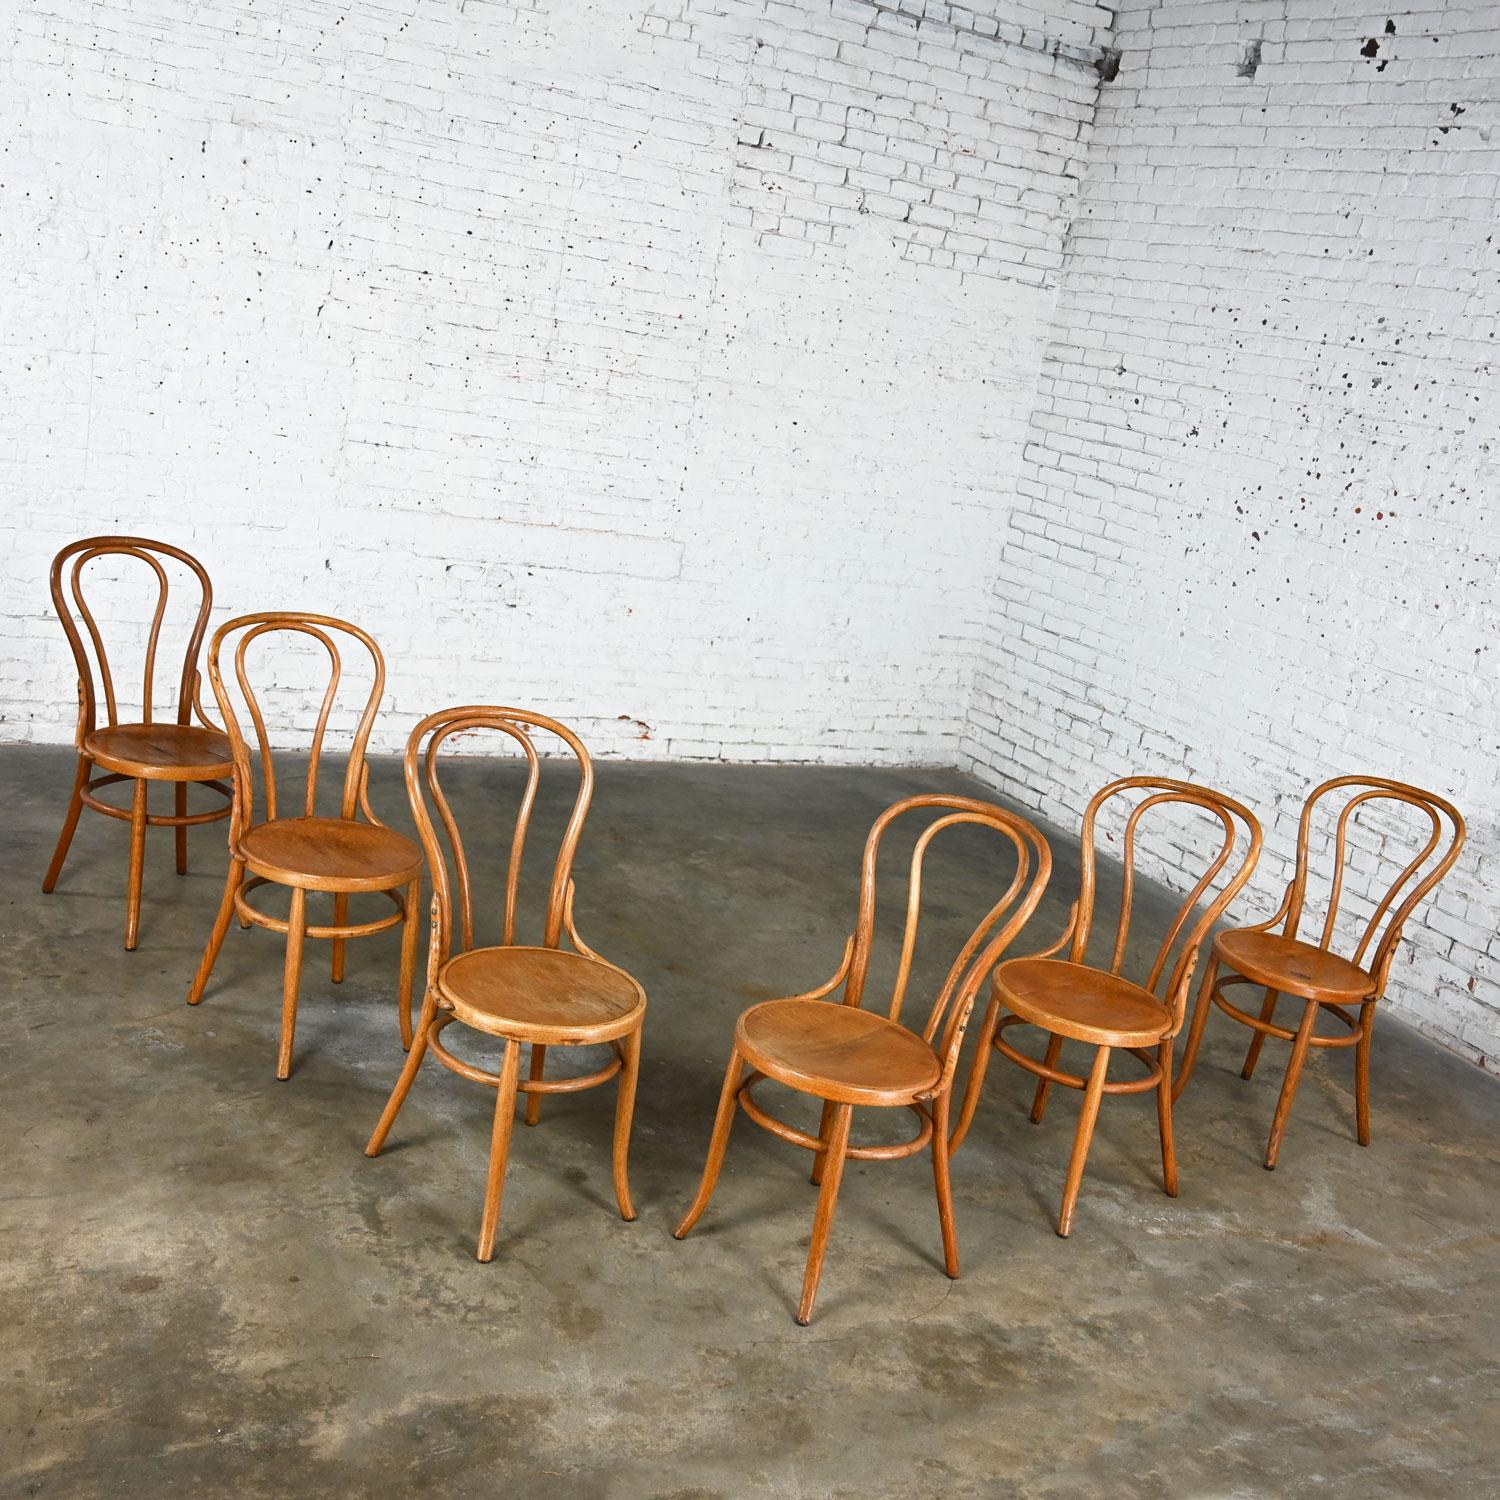 Bauhaus Oak Bentwood Chairs Attributed to Thonet #18 Café Chair Set of 6 For Sale 6